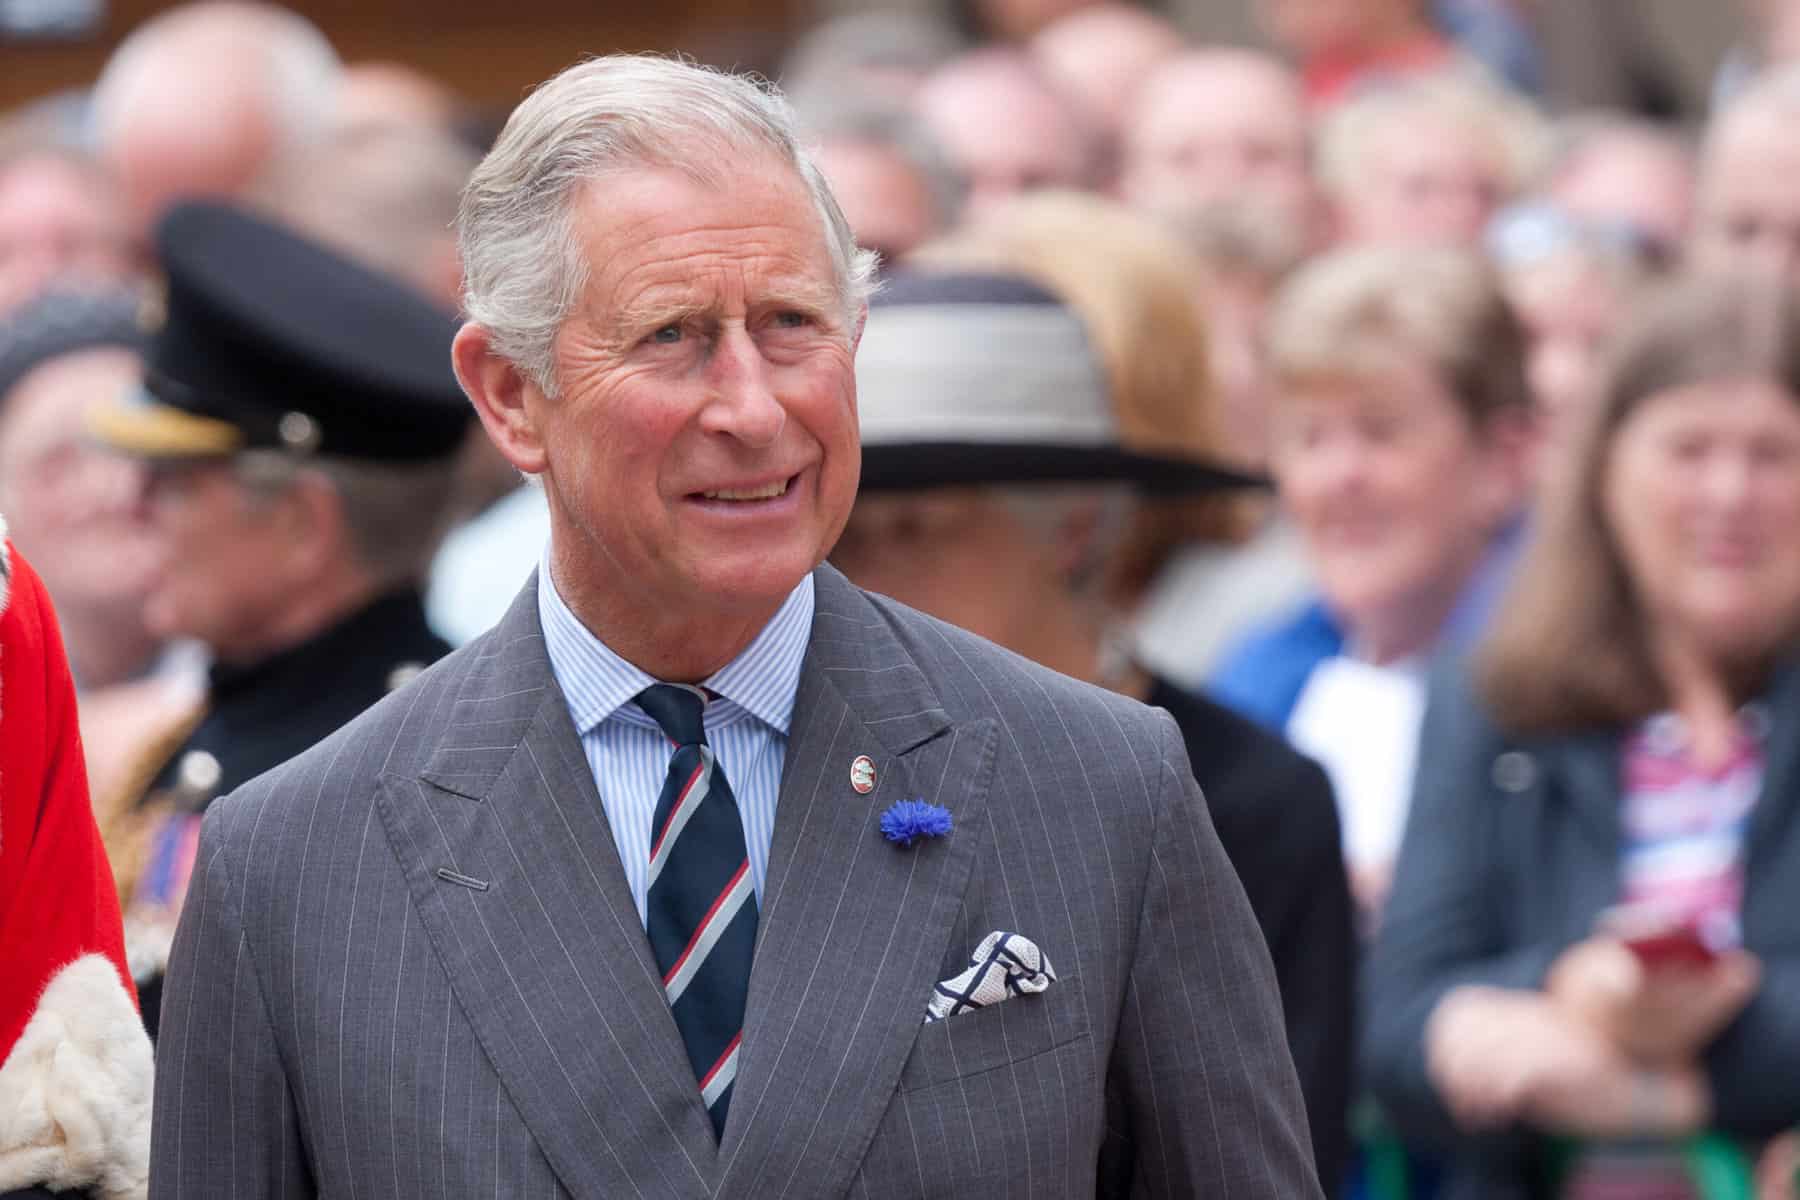 Prince Charles stands in a crowd wearing a grey suit.